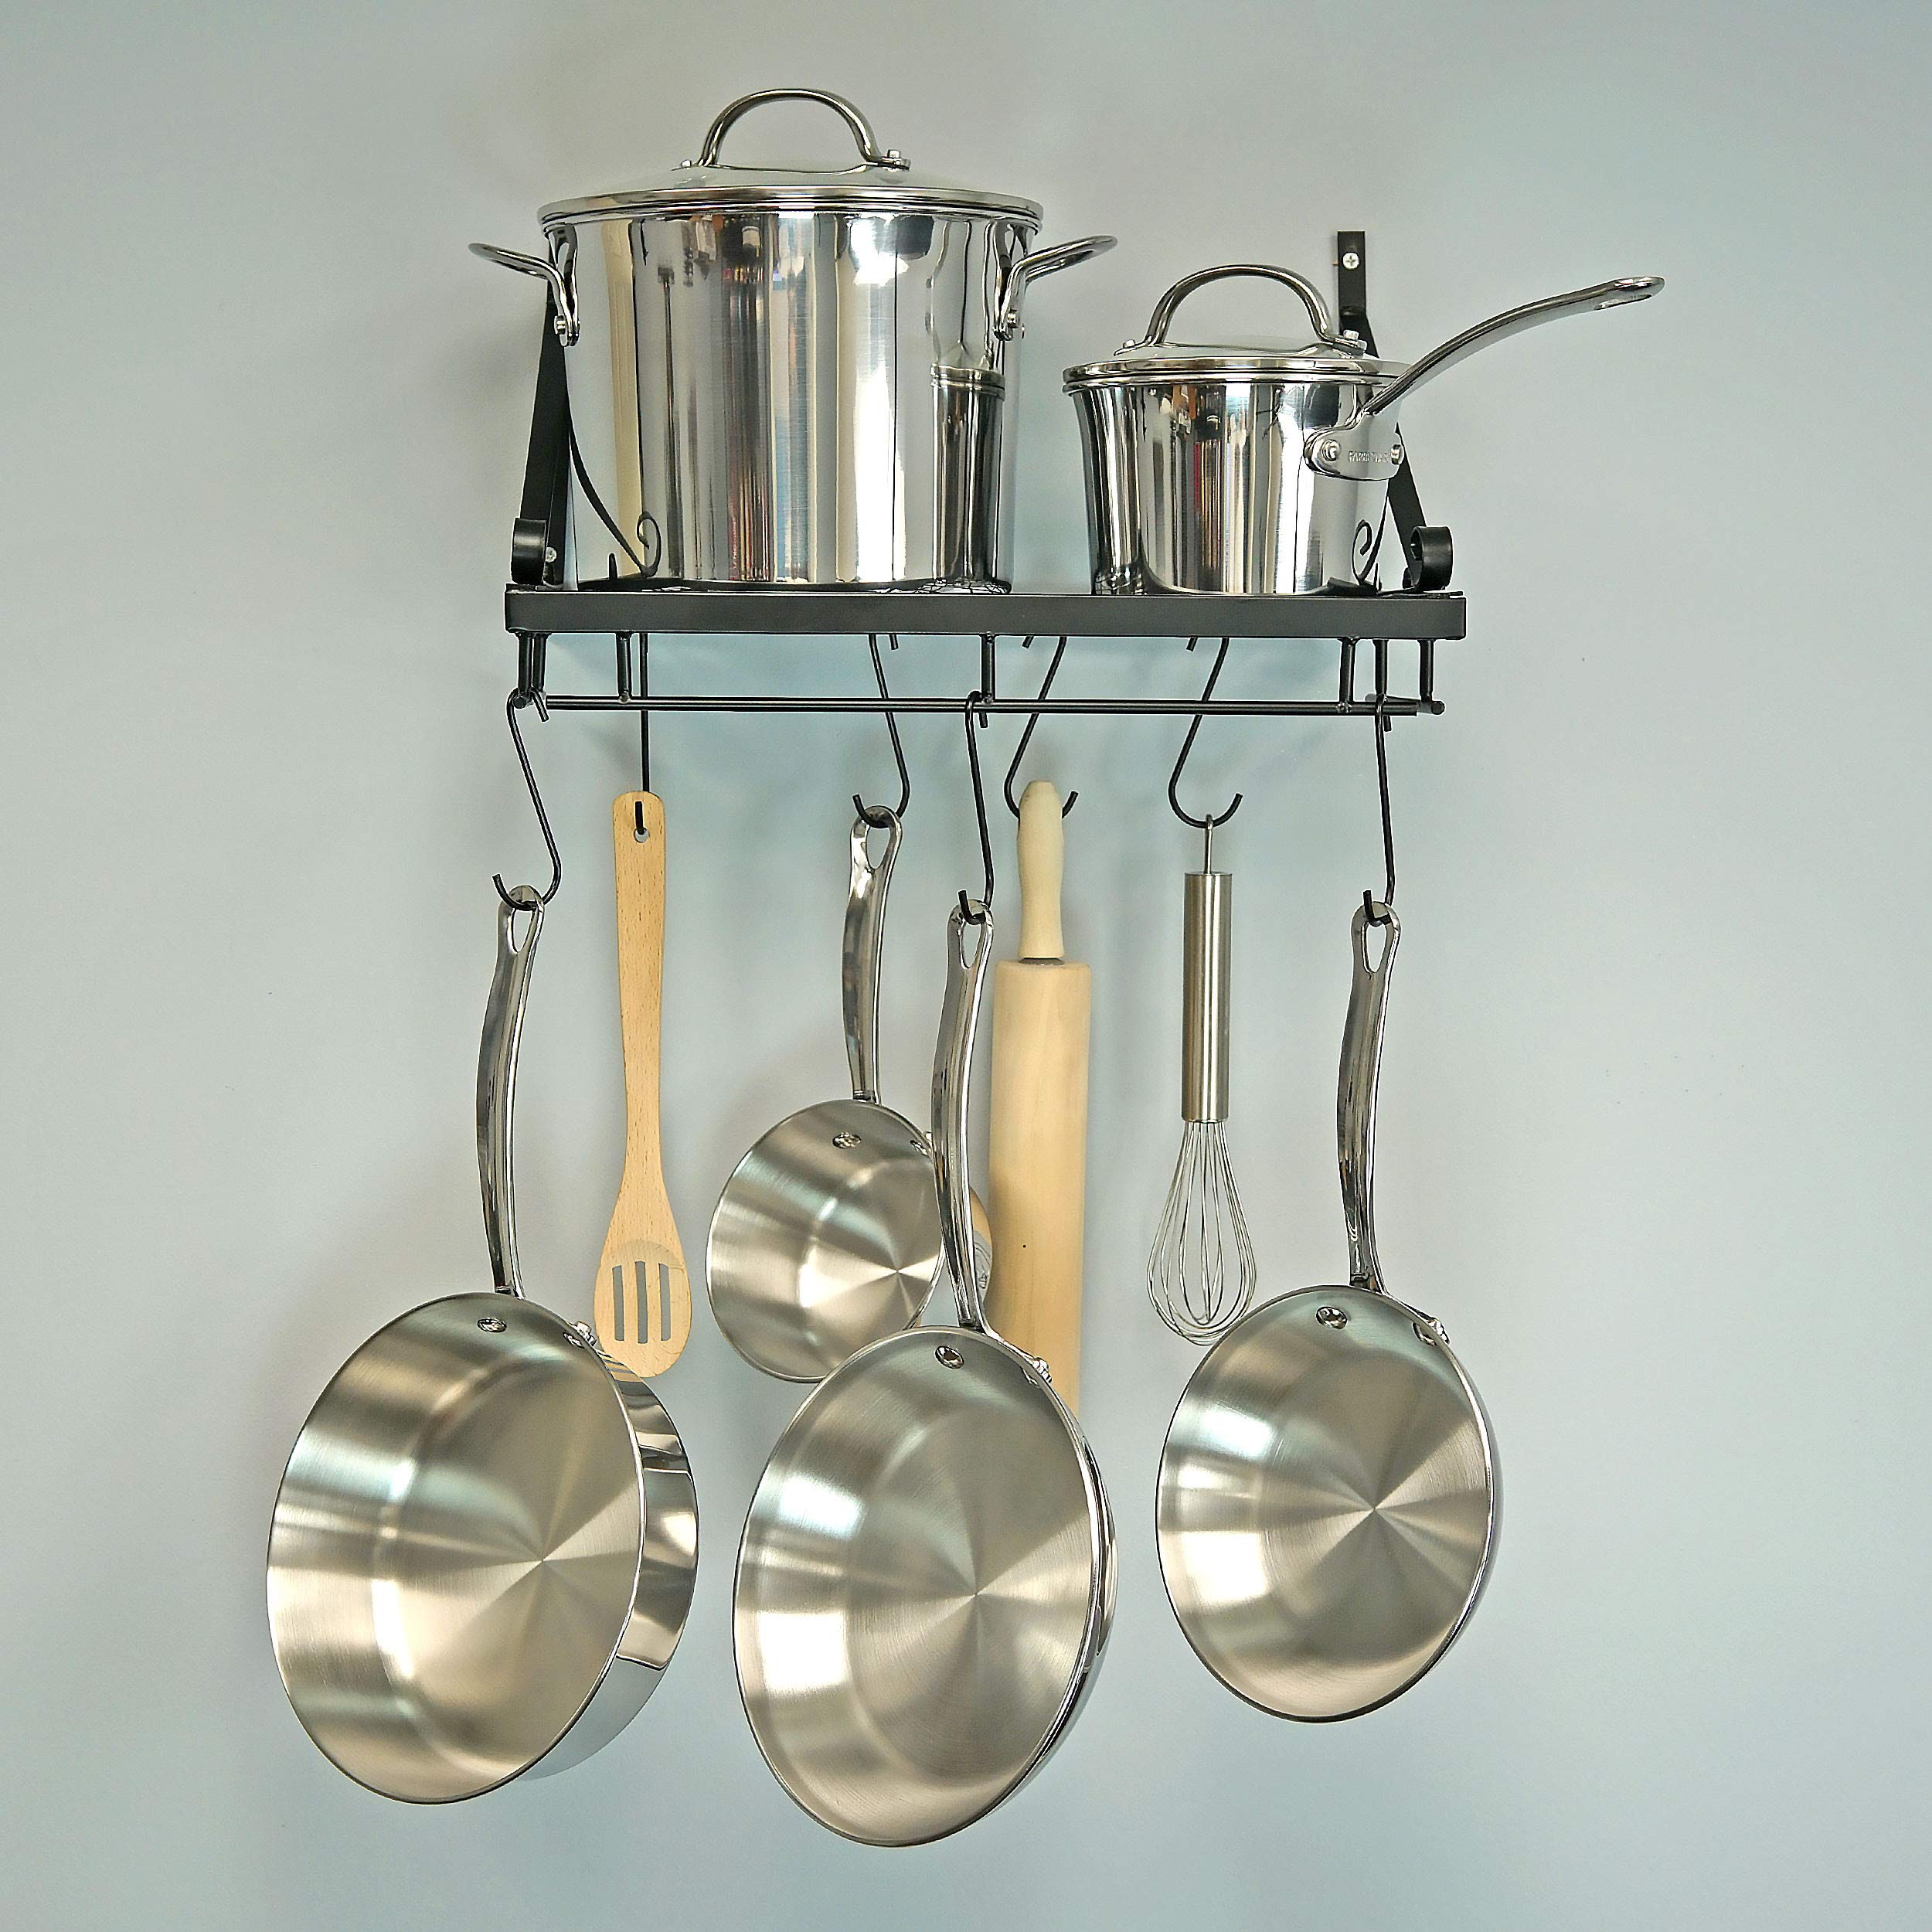 Southern Homewares Classic Pot and Pan Hanging Rack Cast Iron Pans Includes Wire Shelf and 8 Hooks Easy Mount